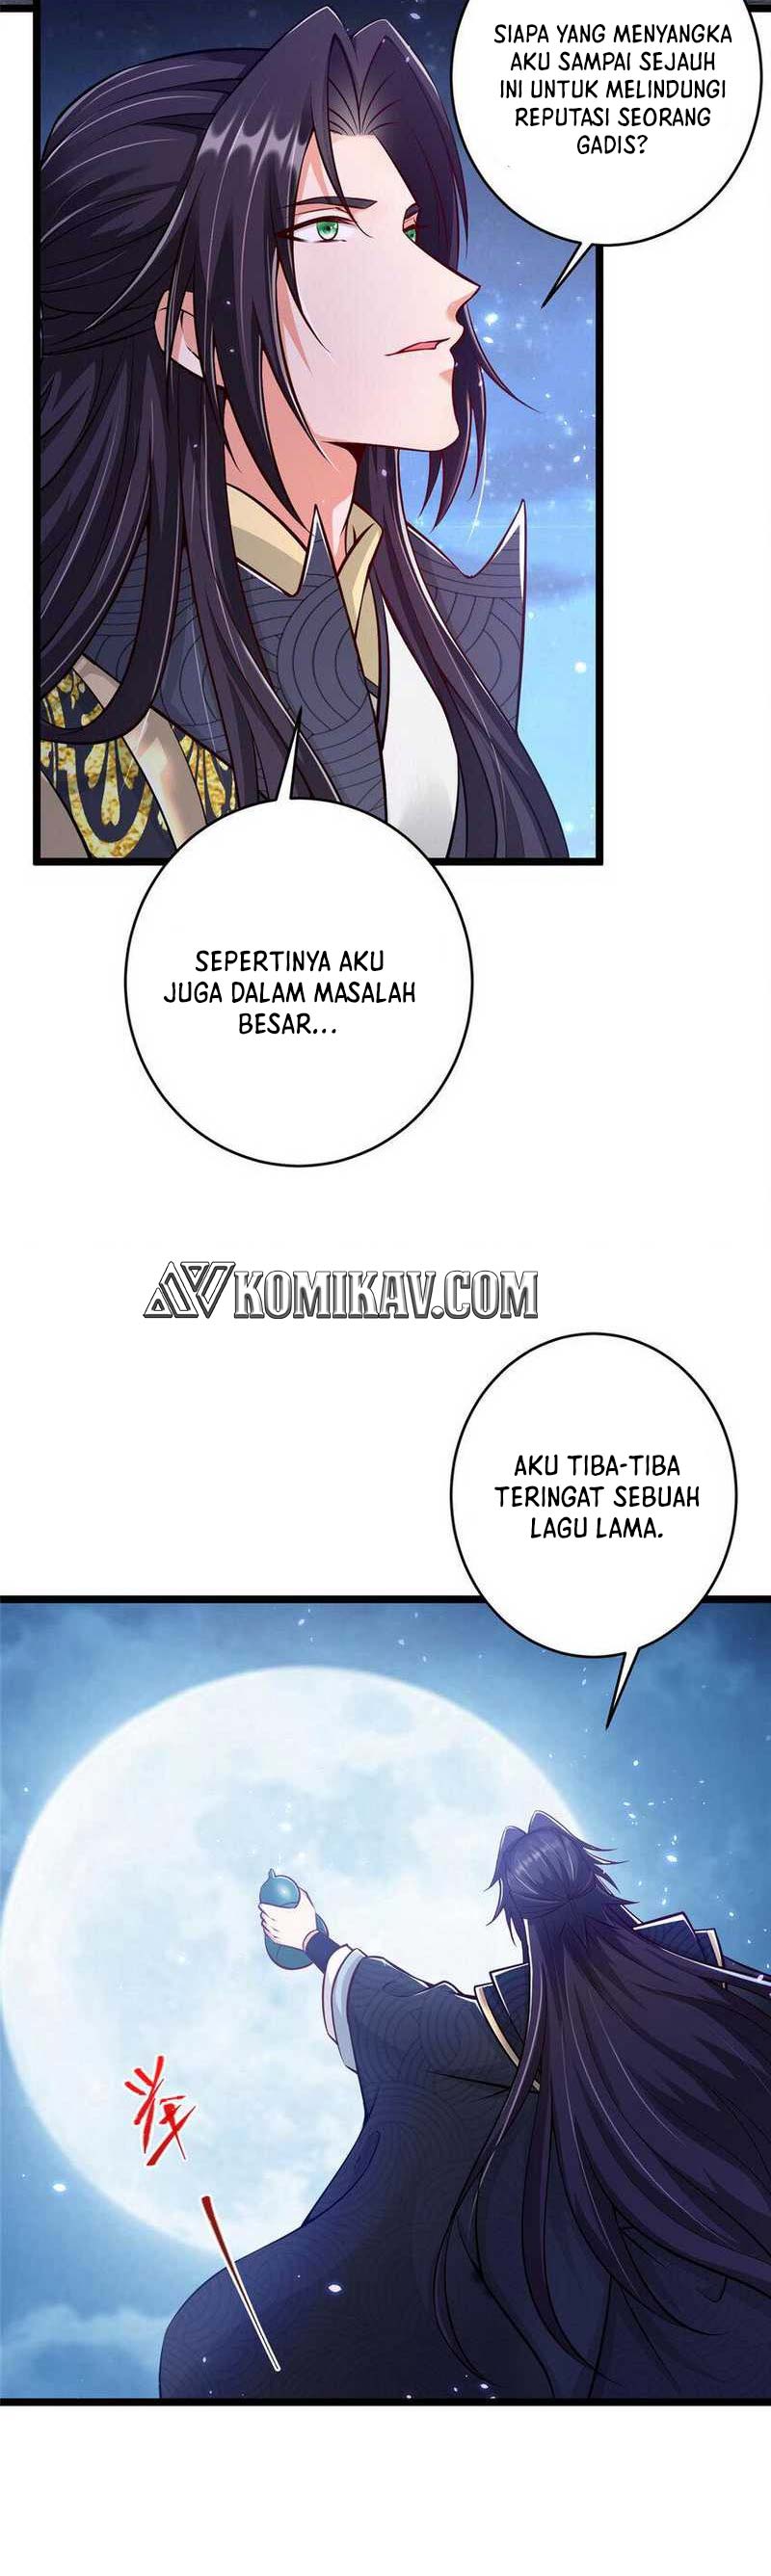 Keep A Low Profile, Sect Leader Chapter 183 Bahasa Indonesia